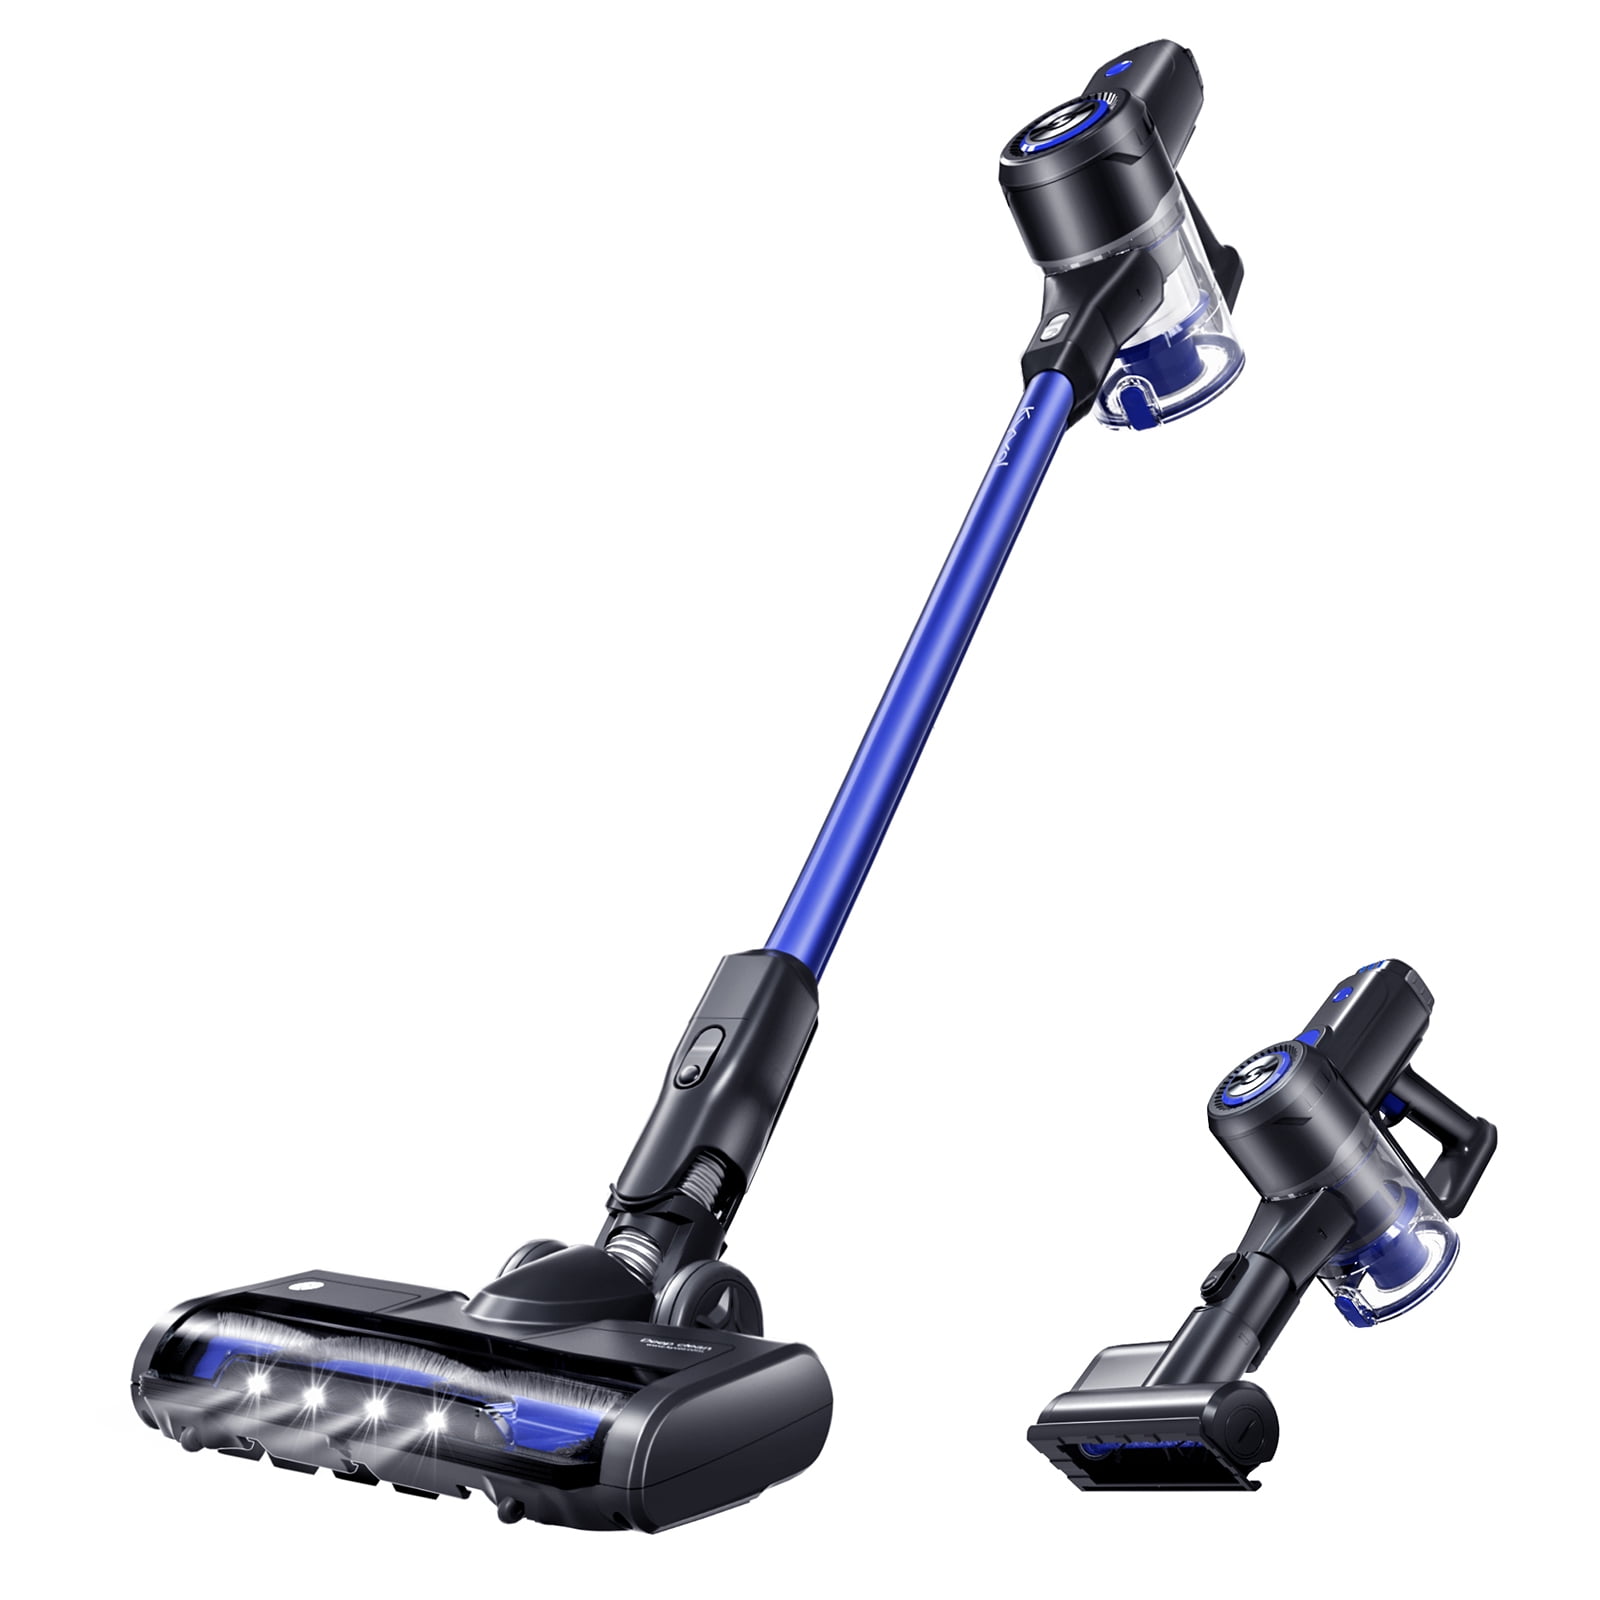 Kyvol V20 Cordless Stick Vacuums, 25,000 Pa Strong Suction, 3 Speed Suction, Lightweight Upright